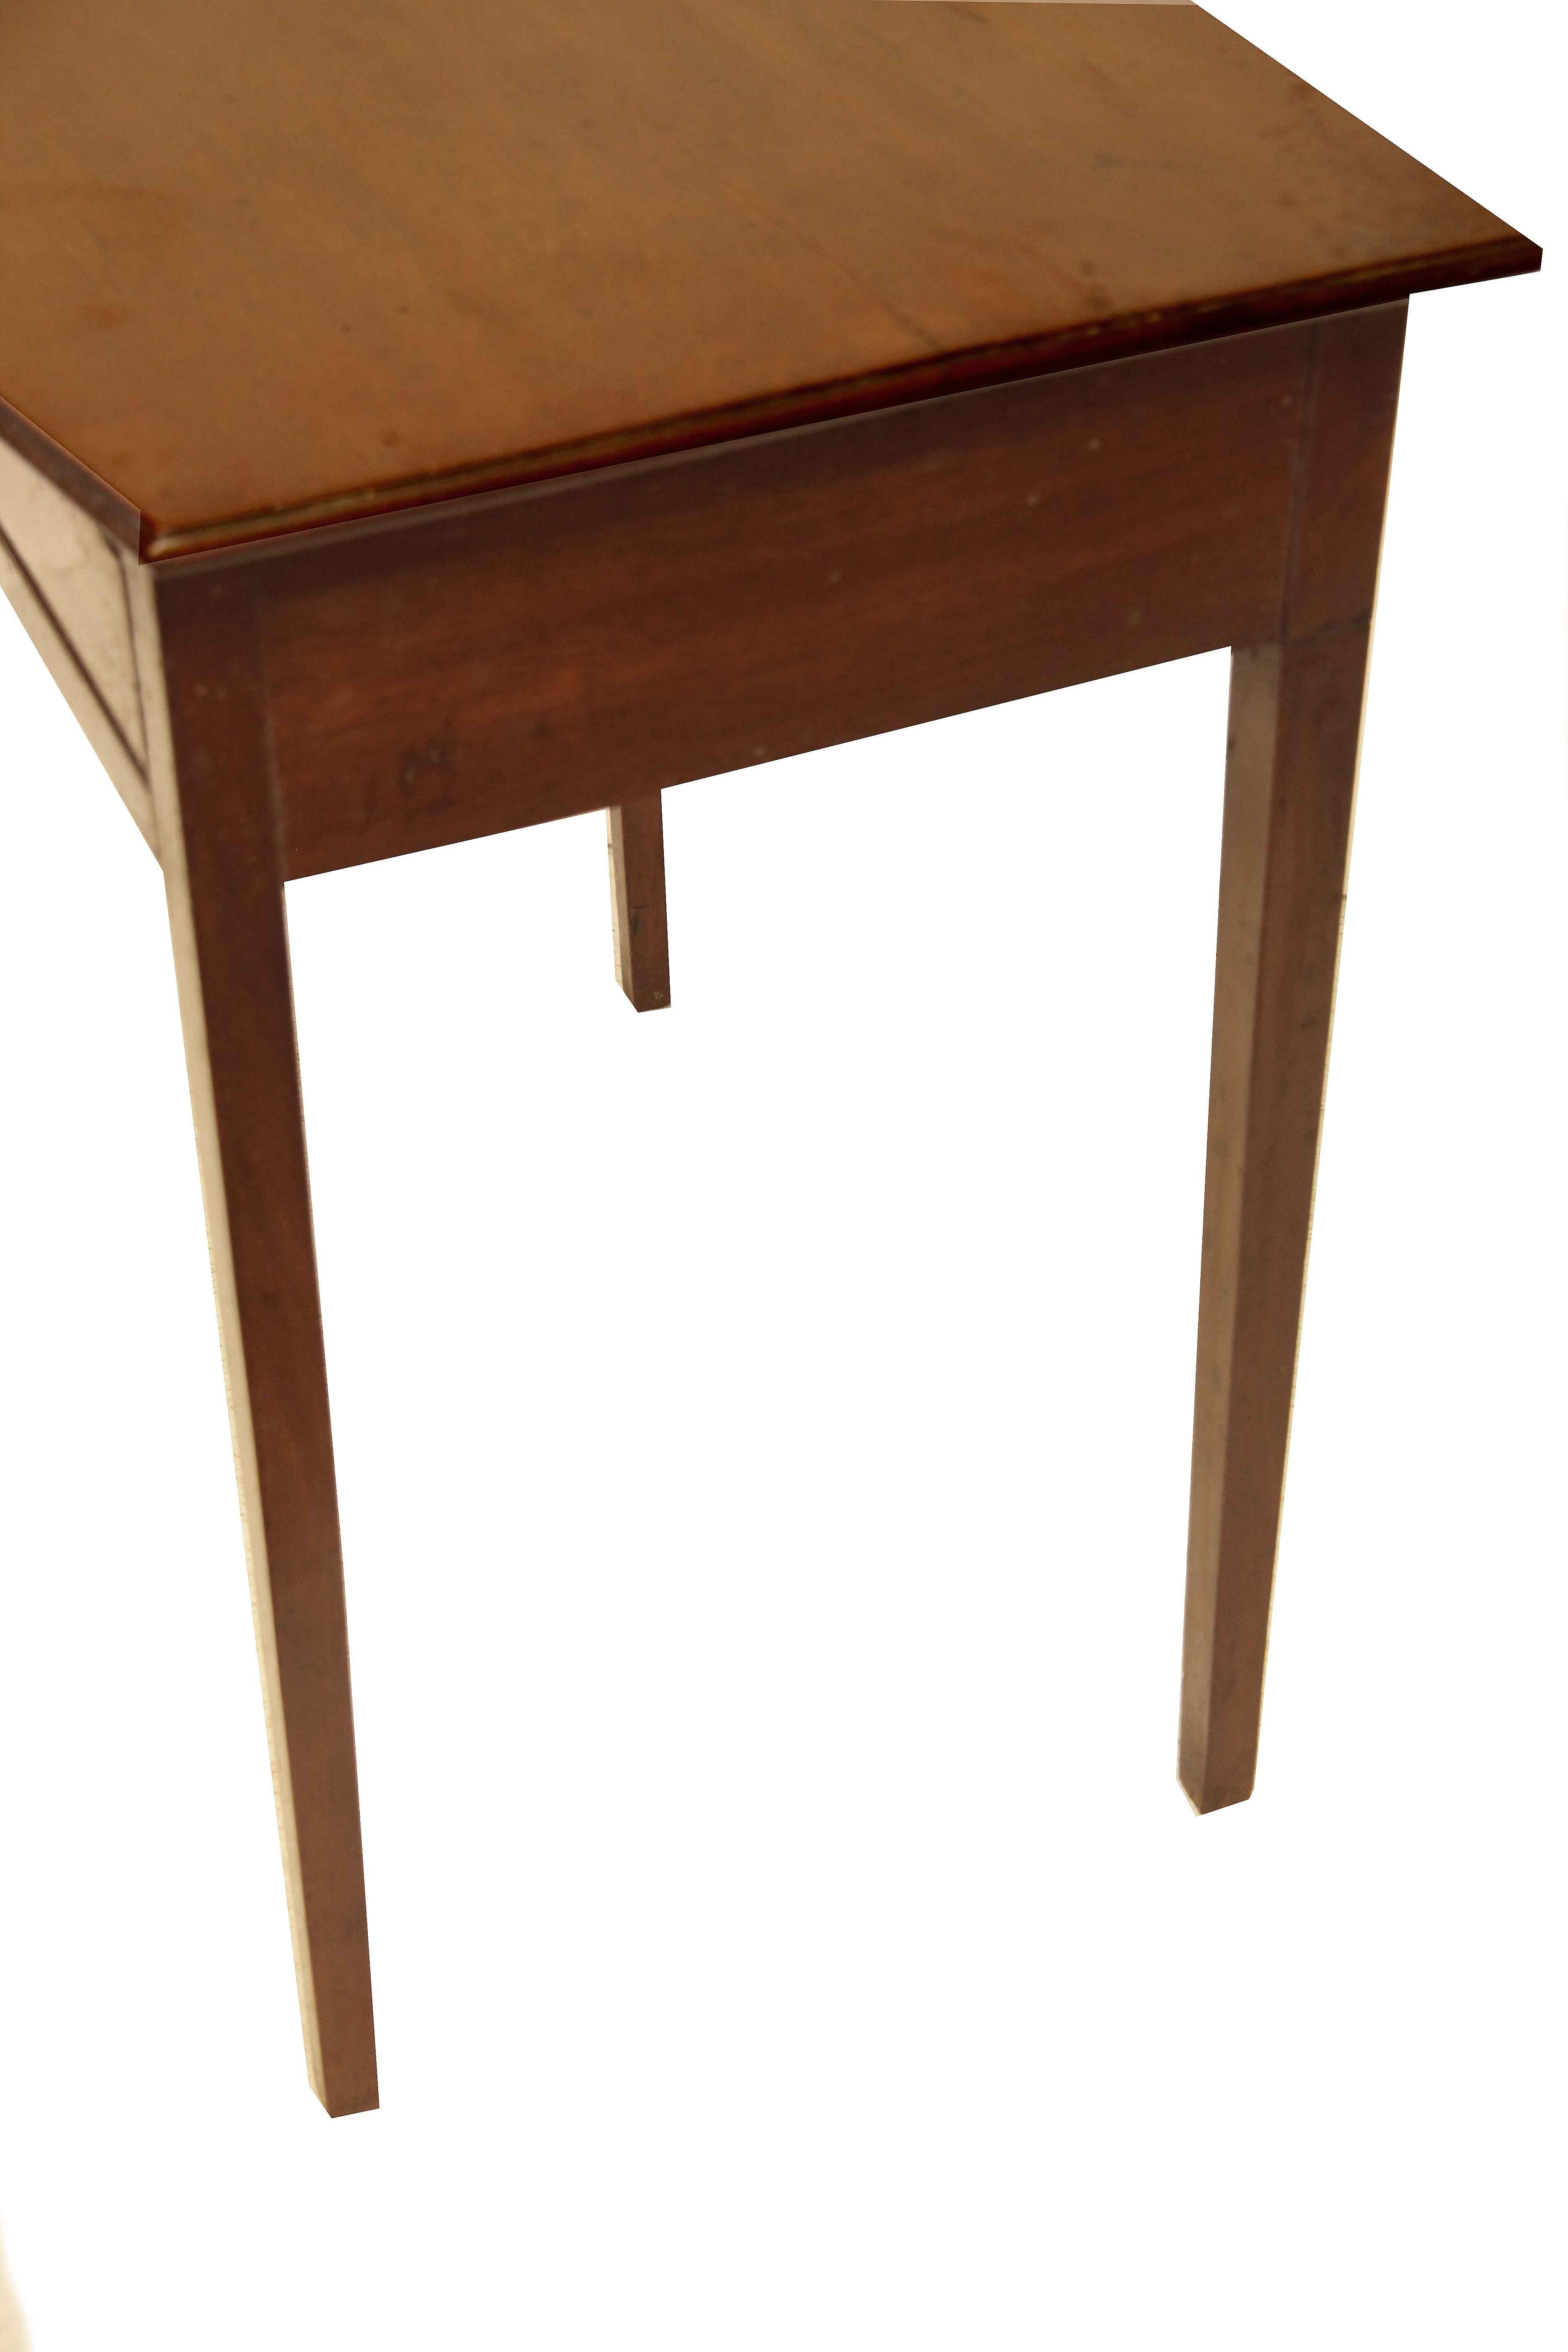 English Hepplewhite Bow Front Side Table For Sale